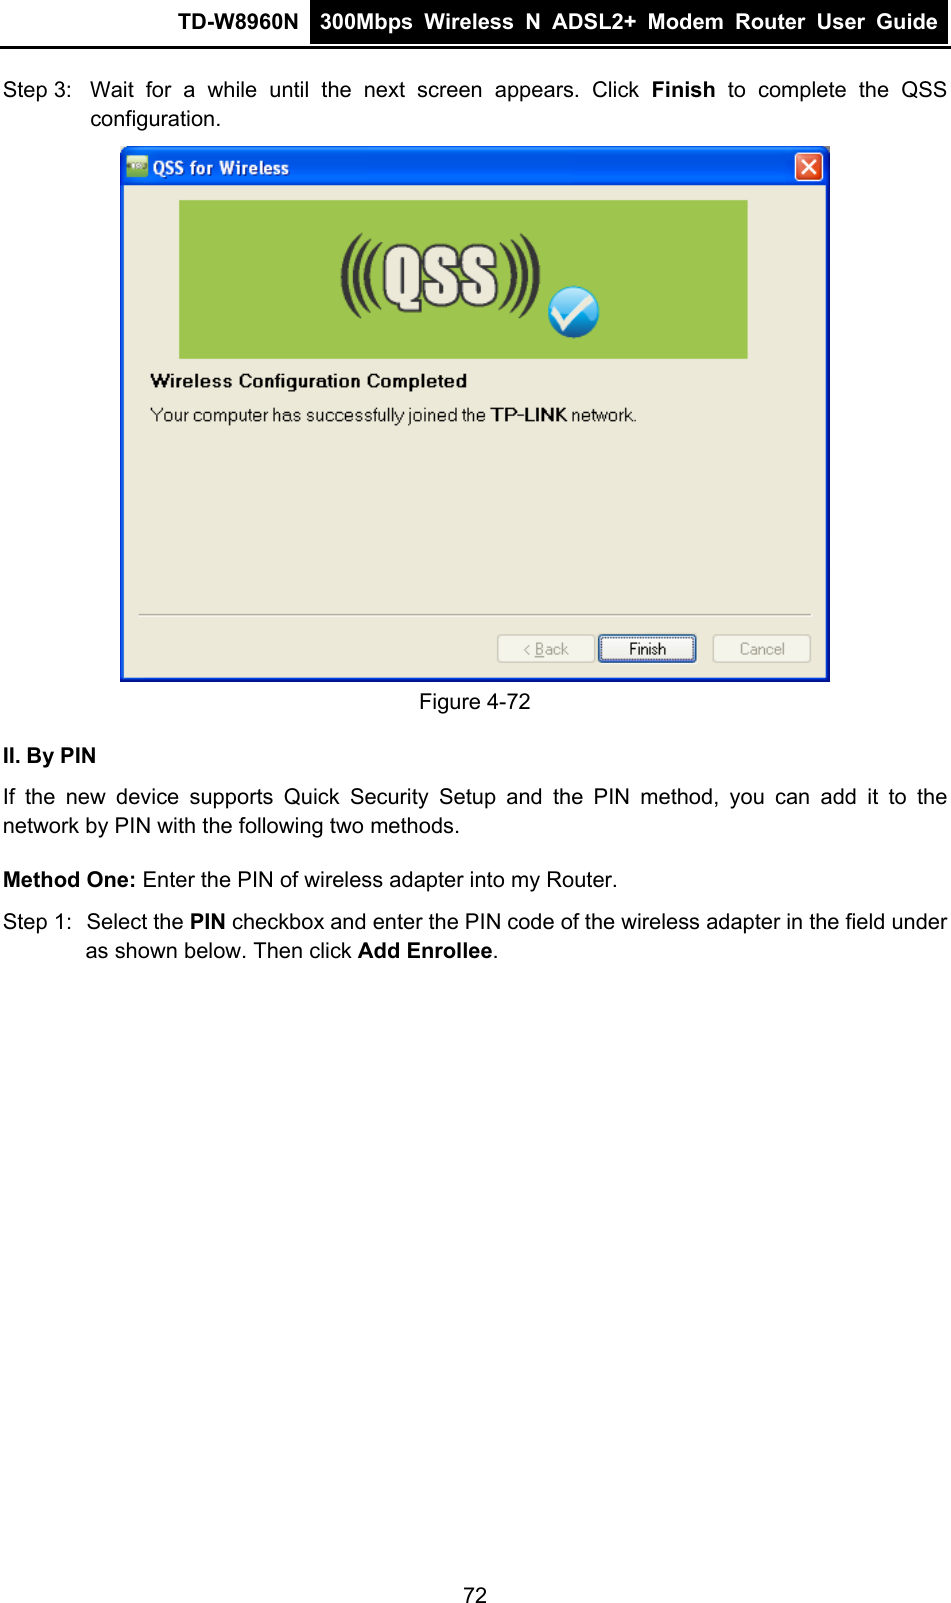 TD-W8960N  300Mbps Wireless N ADSL2+ Modem Router User Guide  Step 3:  Wait for a while until the next screen appears. Click Finish to complete the QSS configuration.  Figure 4-72 II. By PIN If the new device supports Quick Security Setup and the PIN method, you can add it to the network by PIN with the following two methods. Method One: Enter the PIN of wireless adapter into my Router. Step 1:  Select the PIN checkbox and enter the PIN code of the wireless adapter in the field under as shown below. Then click Add Enrollee. 72 